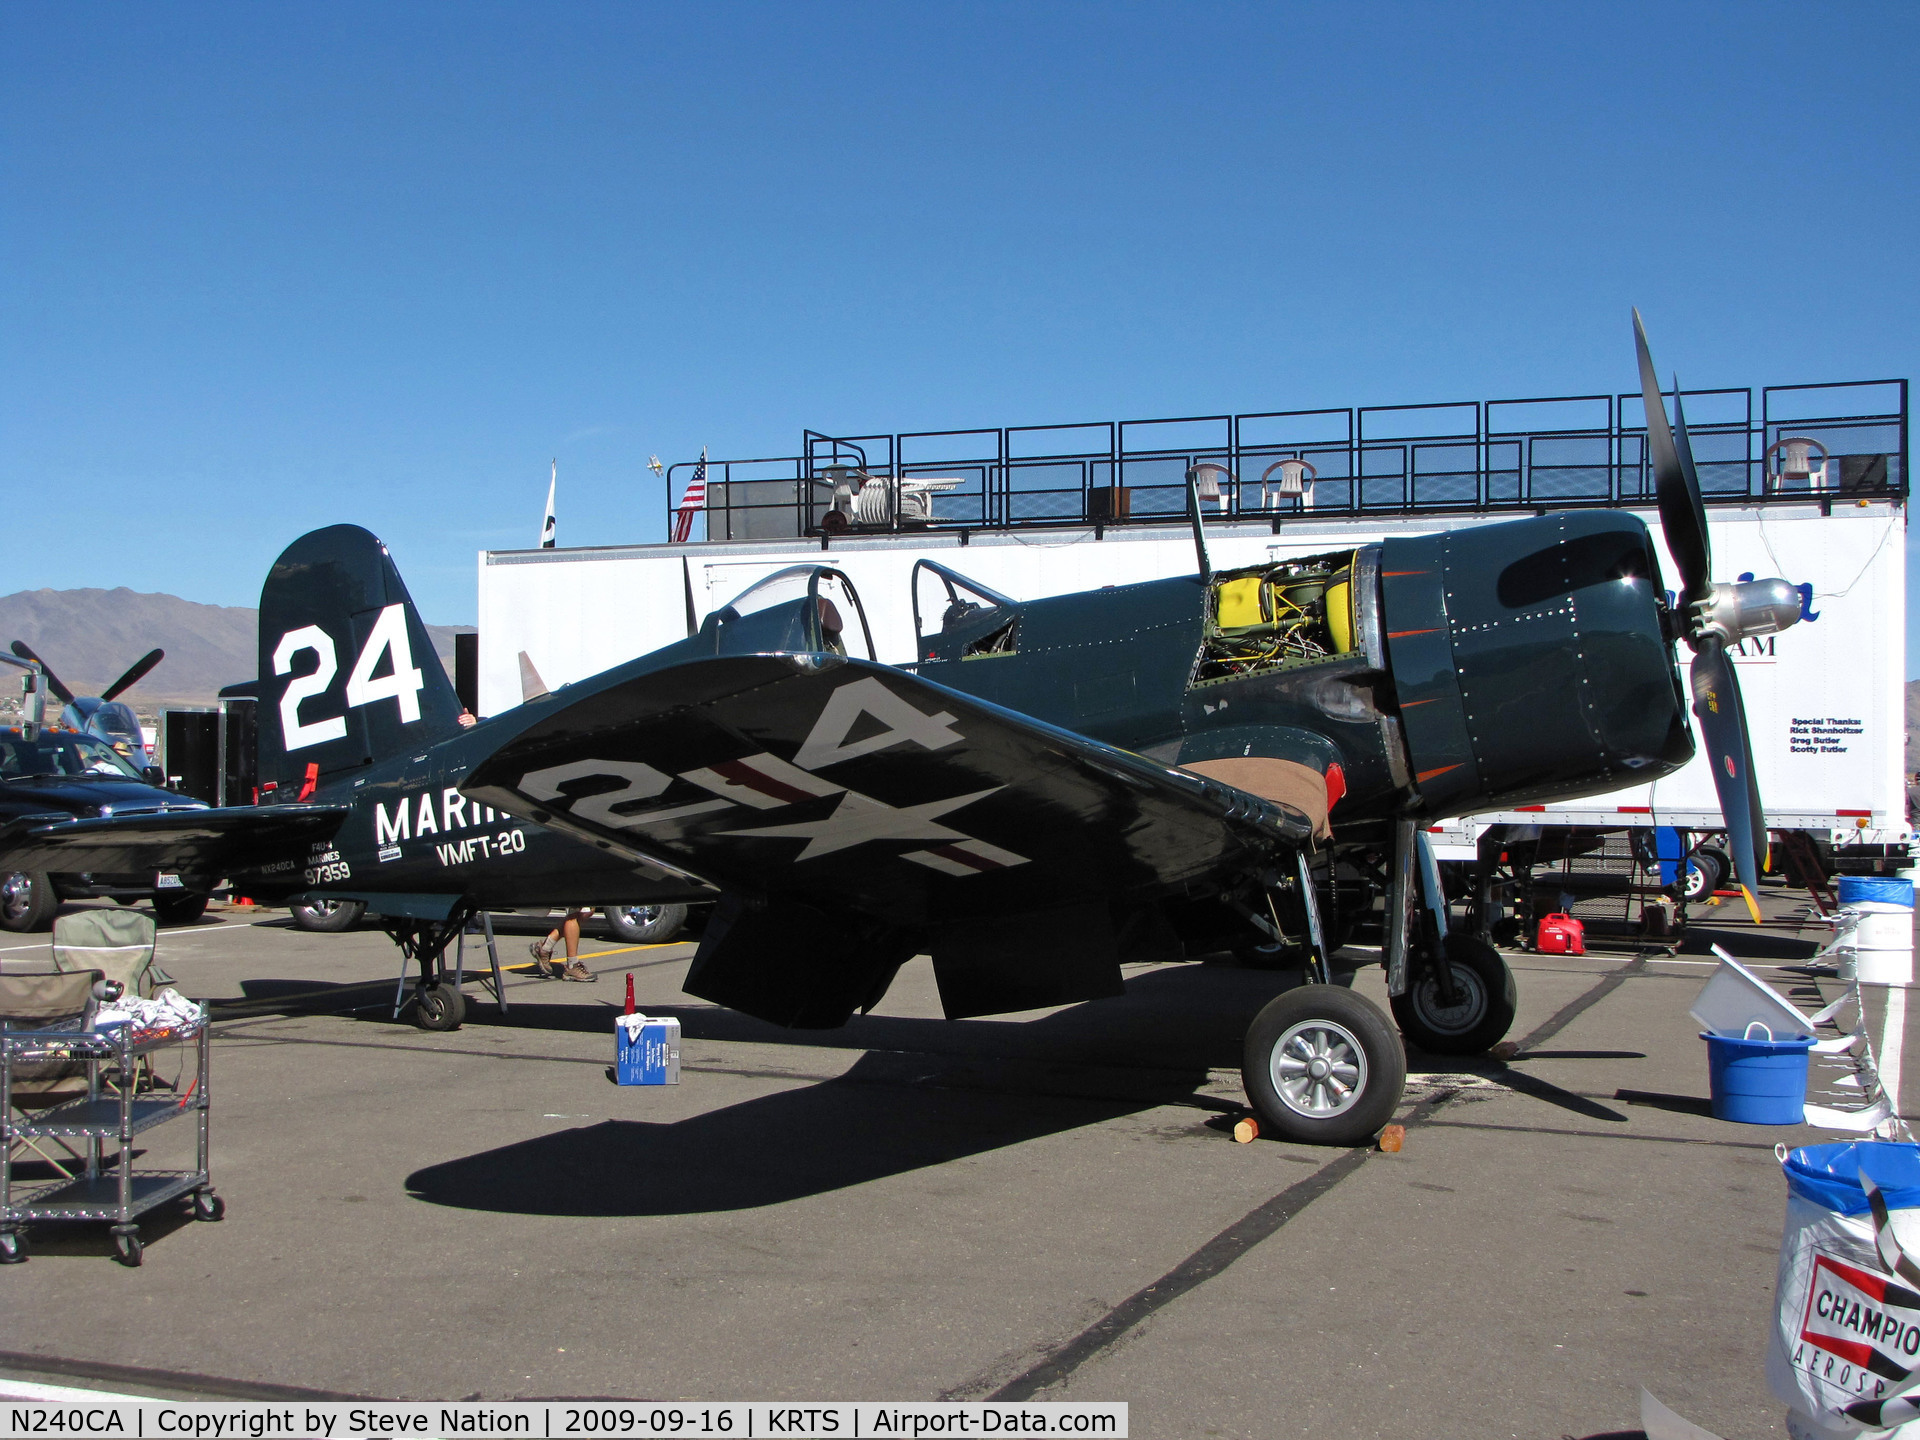 N240CA, 1945 Vought F4U-4 Corsair C/N 9513, Race #24 F4U-4 BuAer 97359 VMFT-20 Marines being worked on pits as NX240CA for Unlimited Class race @ 2009 Reno Air Races